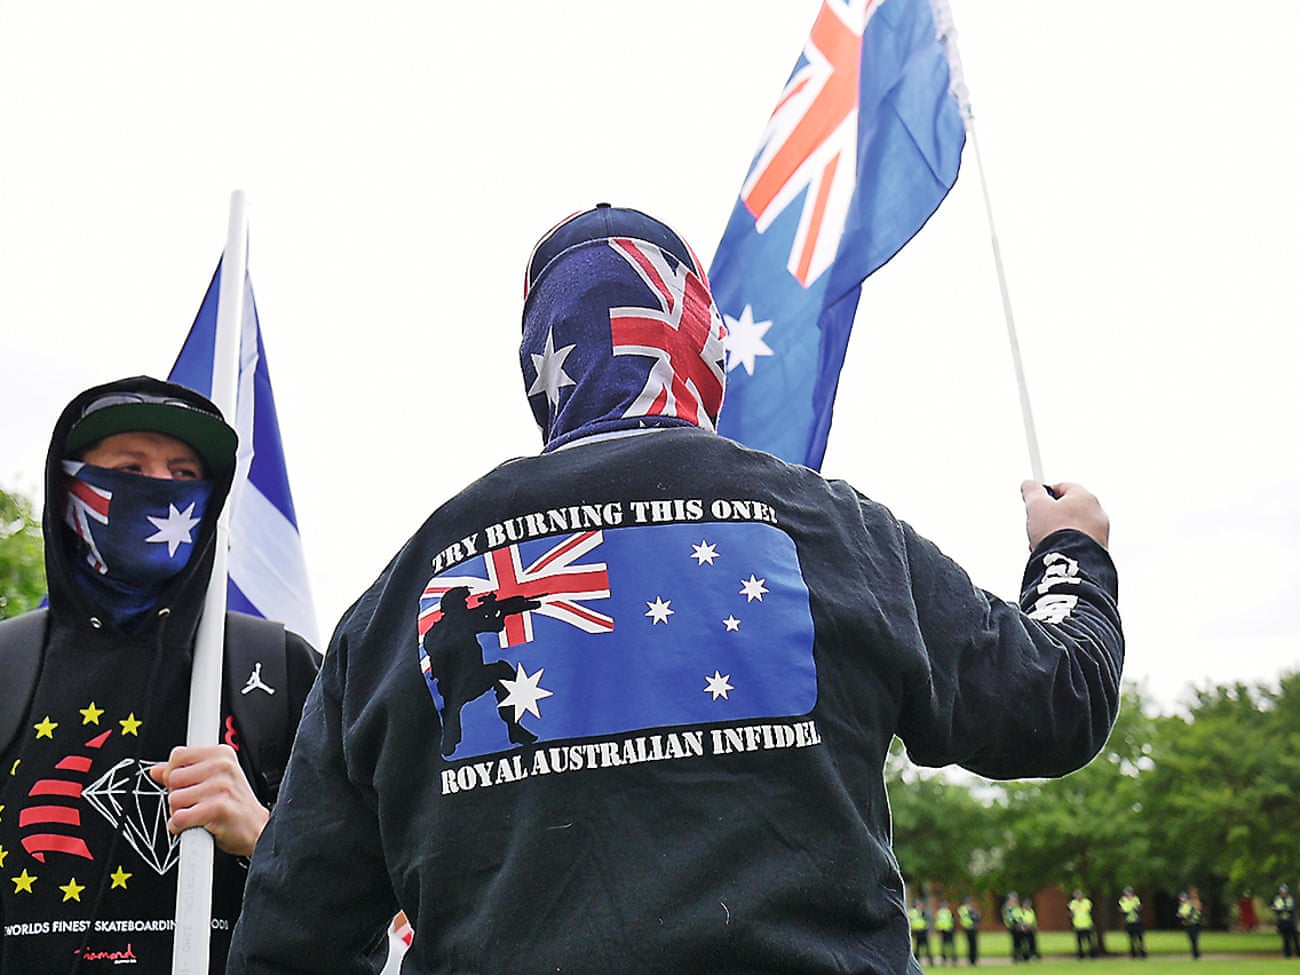 Protesters at a United Patriots Front rally in Melton, Victoria.